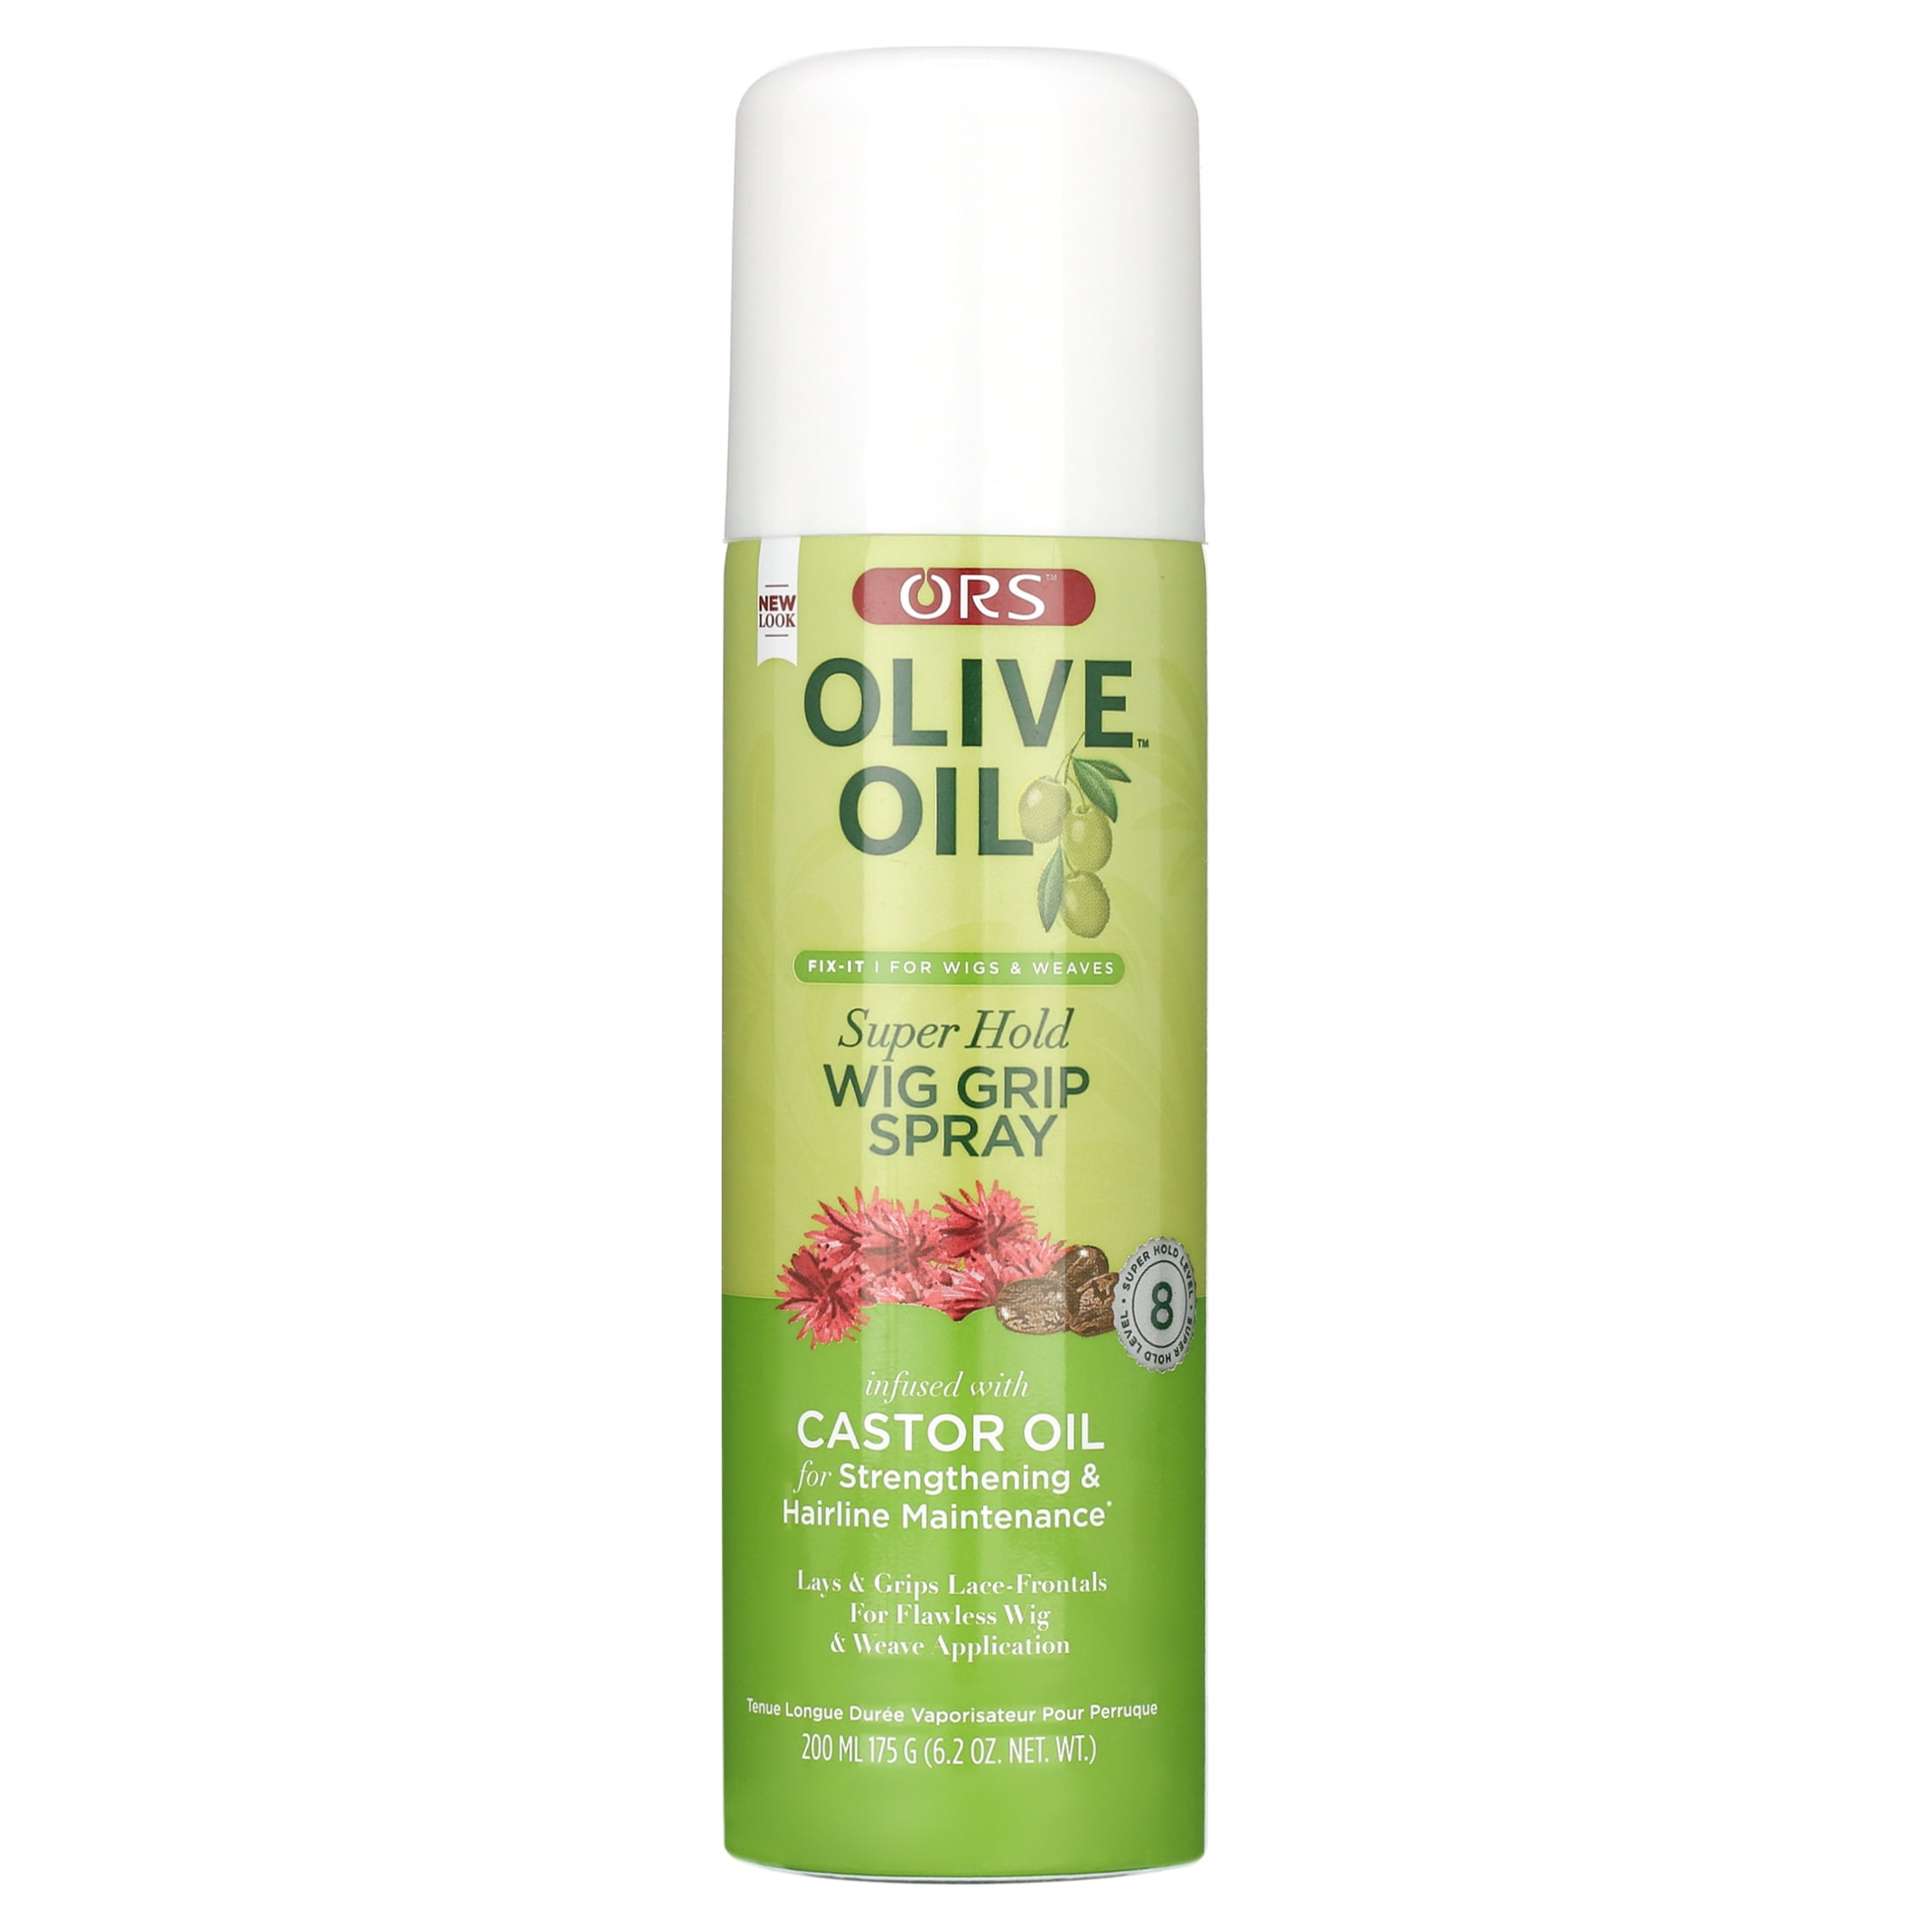 Ors Olive Oil Fix For Wigs And Weaves Glue Remover, 5 Oz